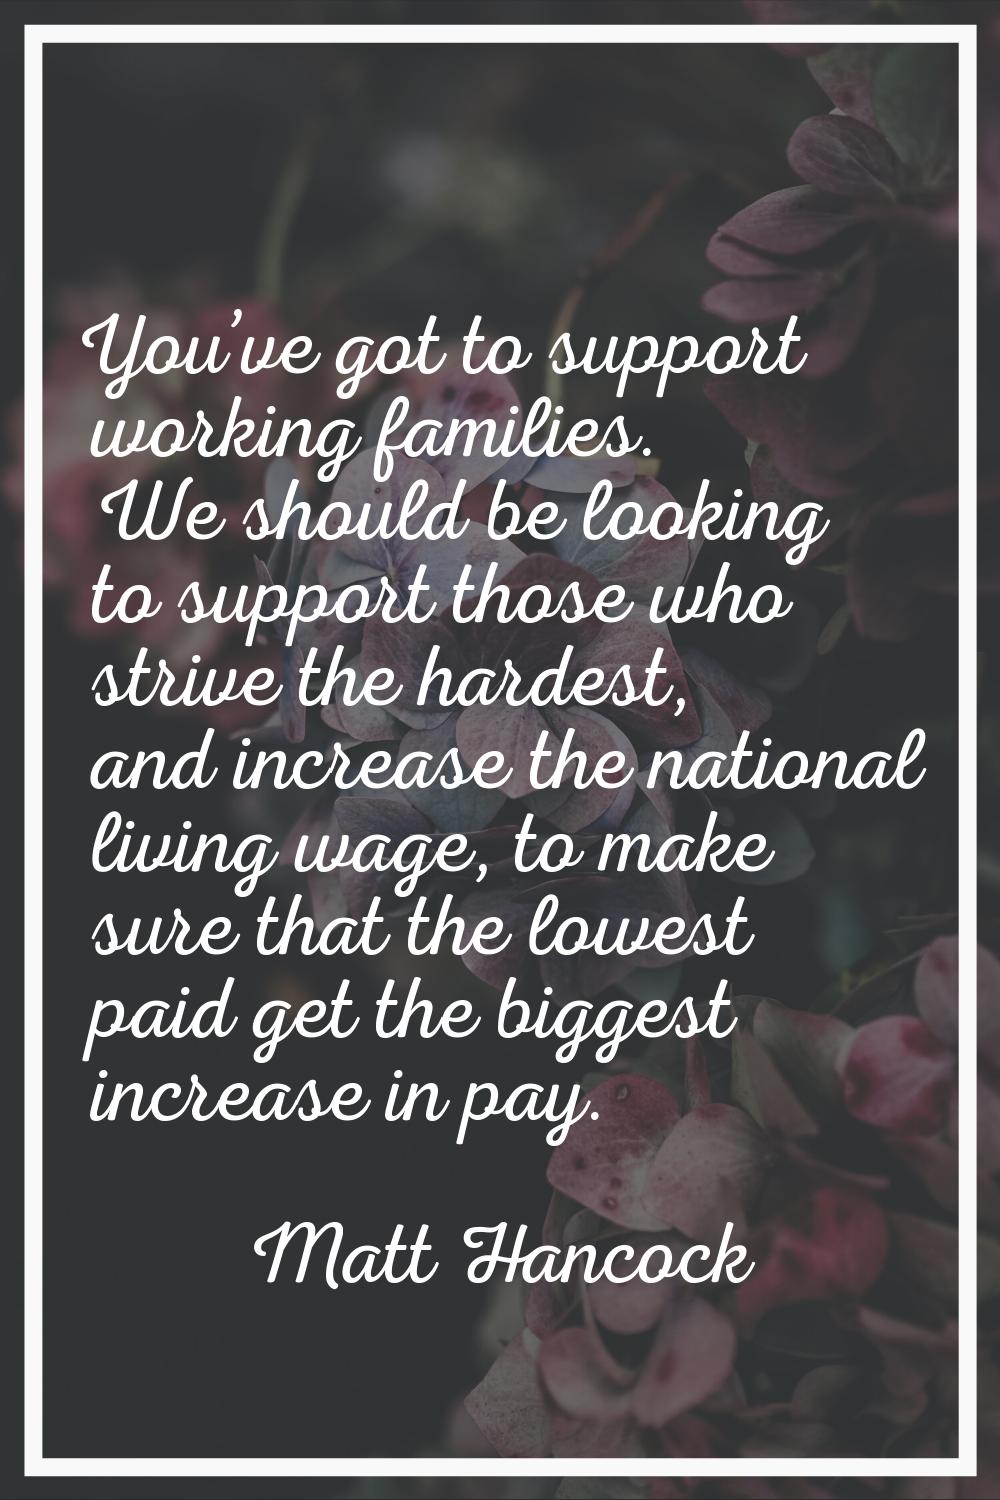 You’ve got to support working families. We should be looking to support those who strive the hardes